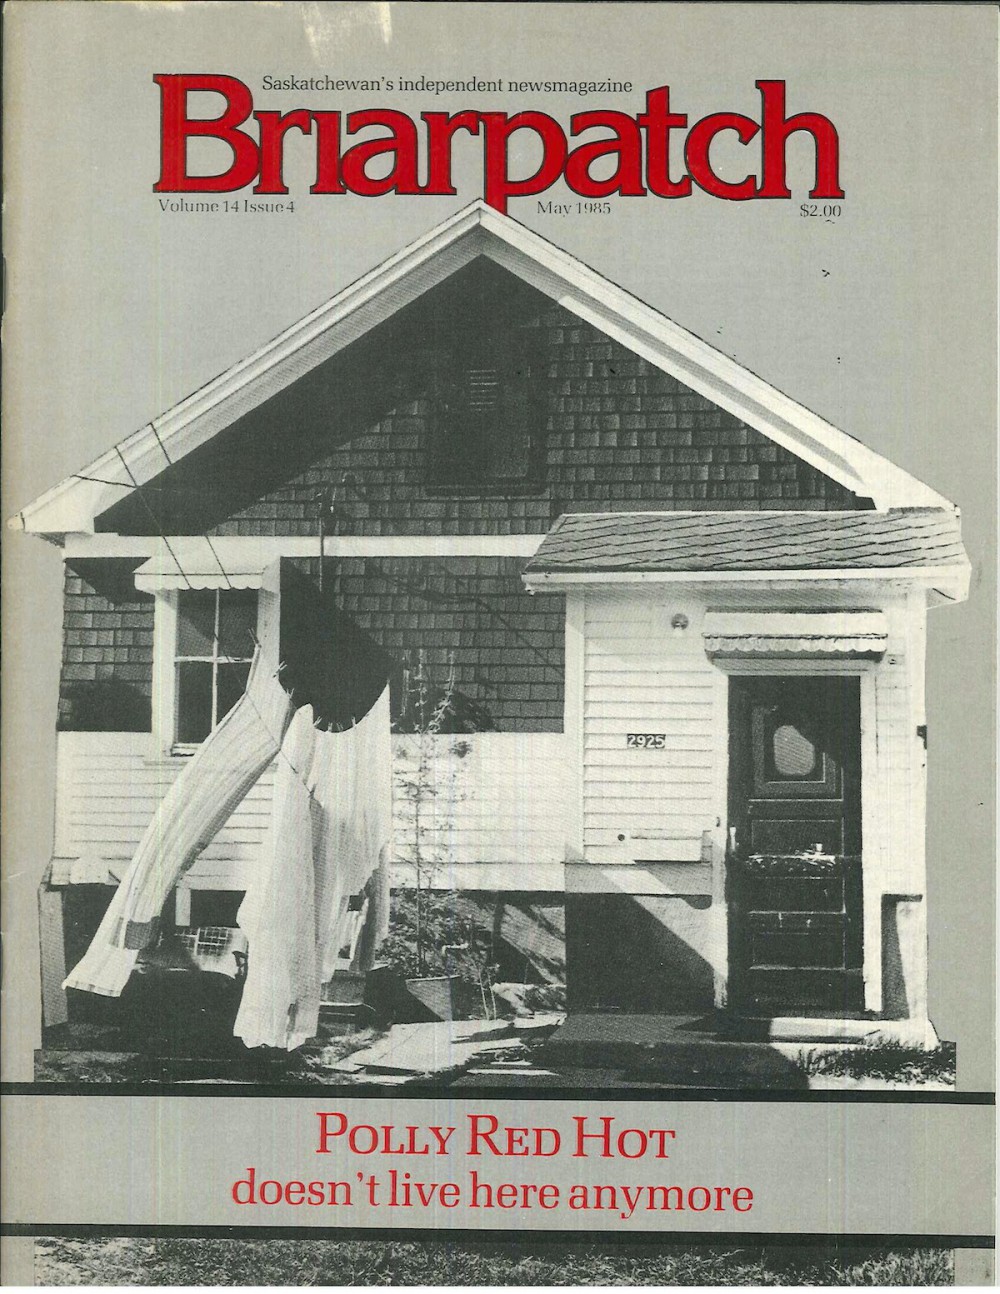 A scan of the May 1985 cover of Briarpatch. Over a black-and-white photo of a small house, the words